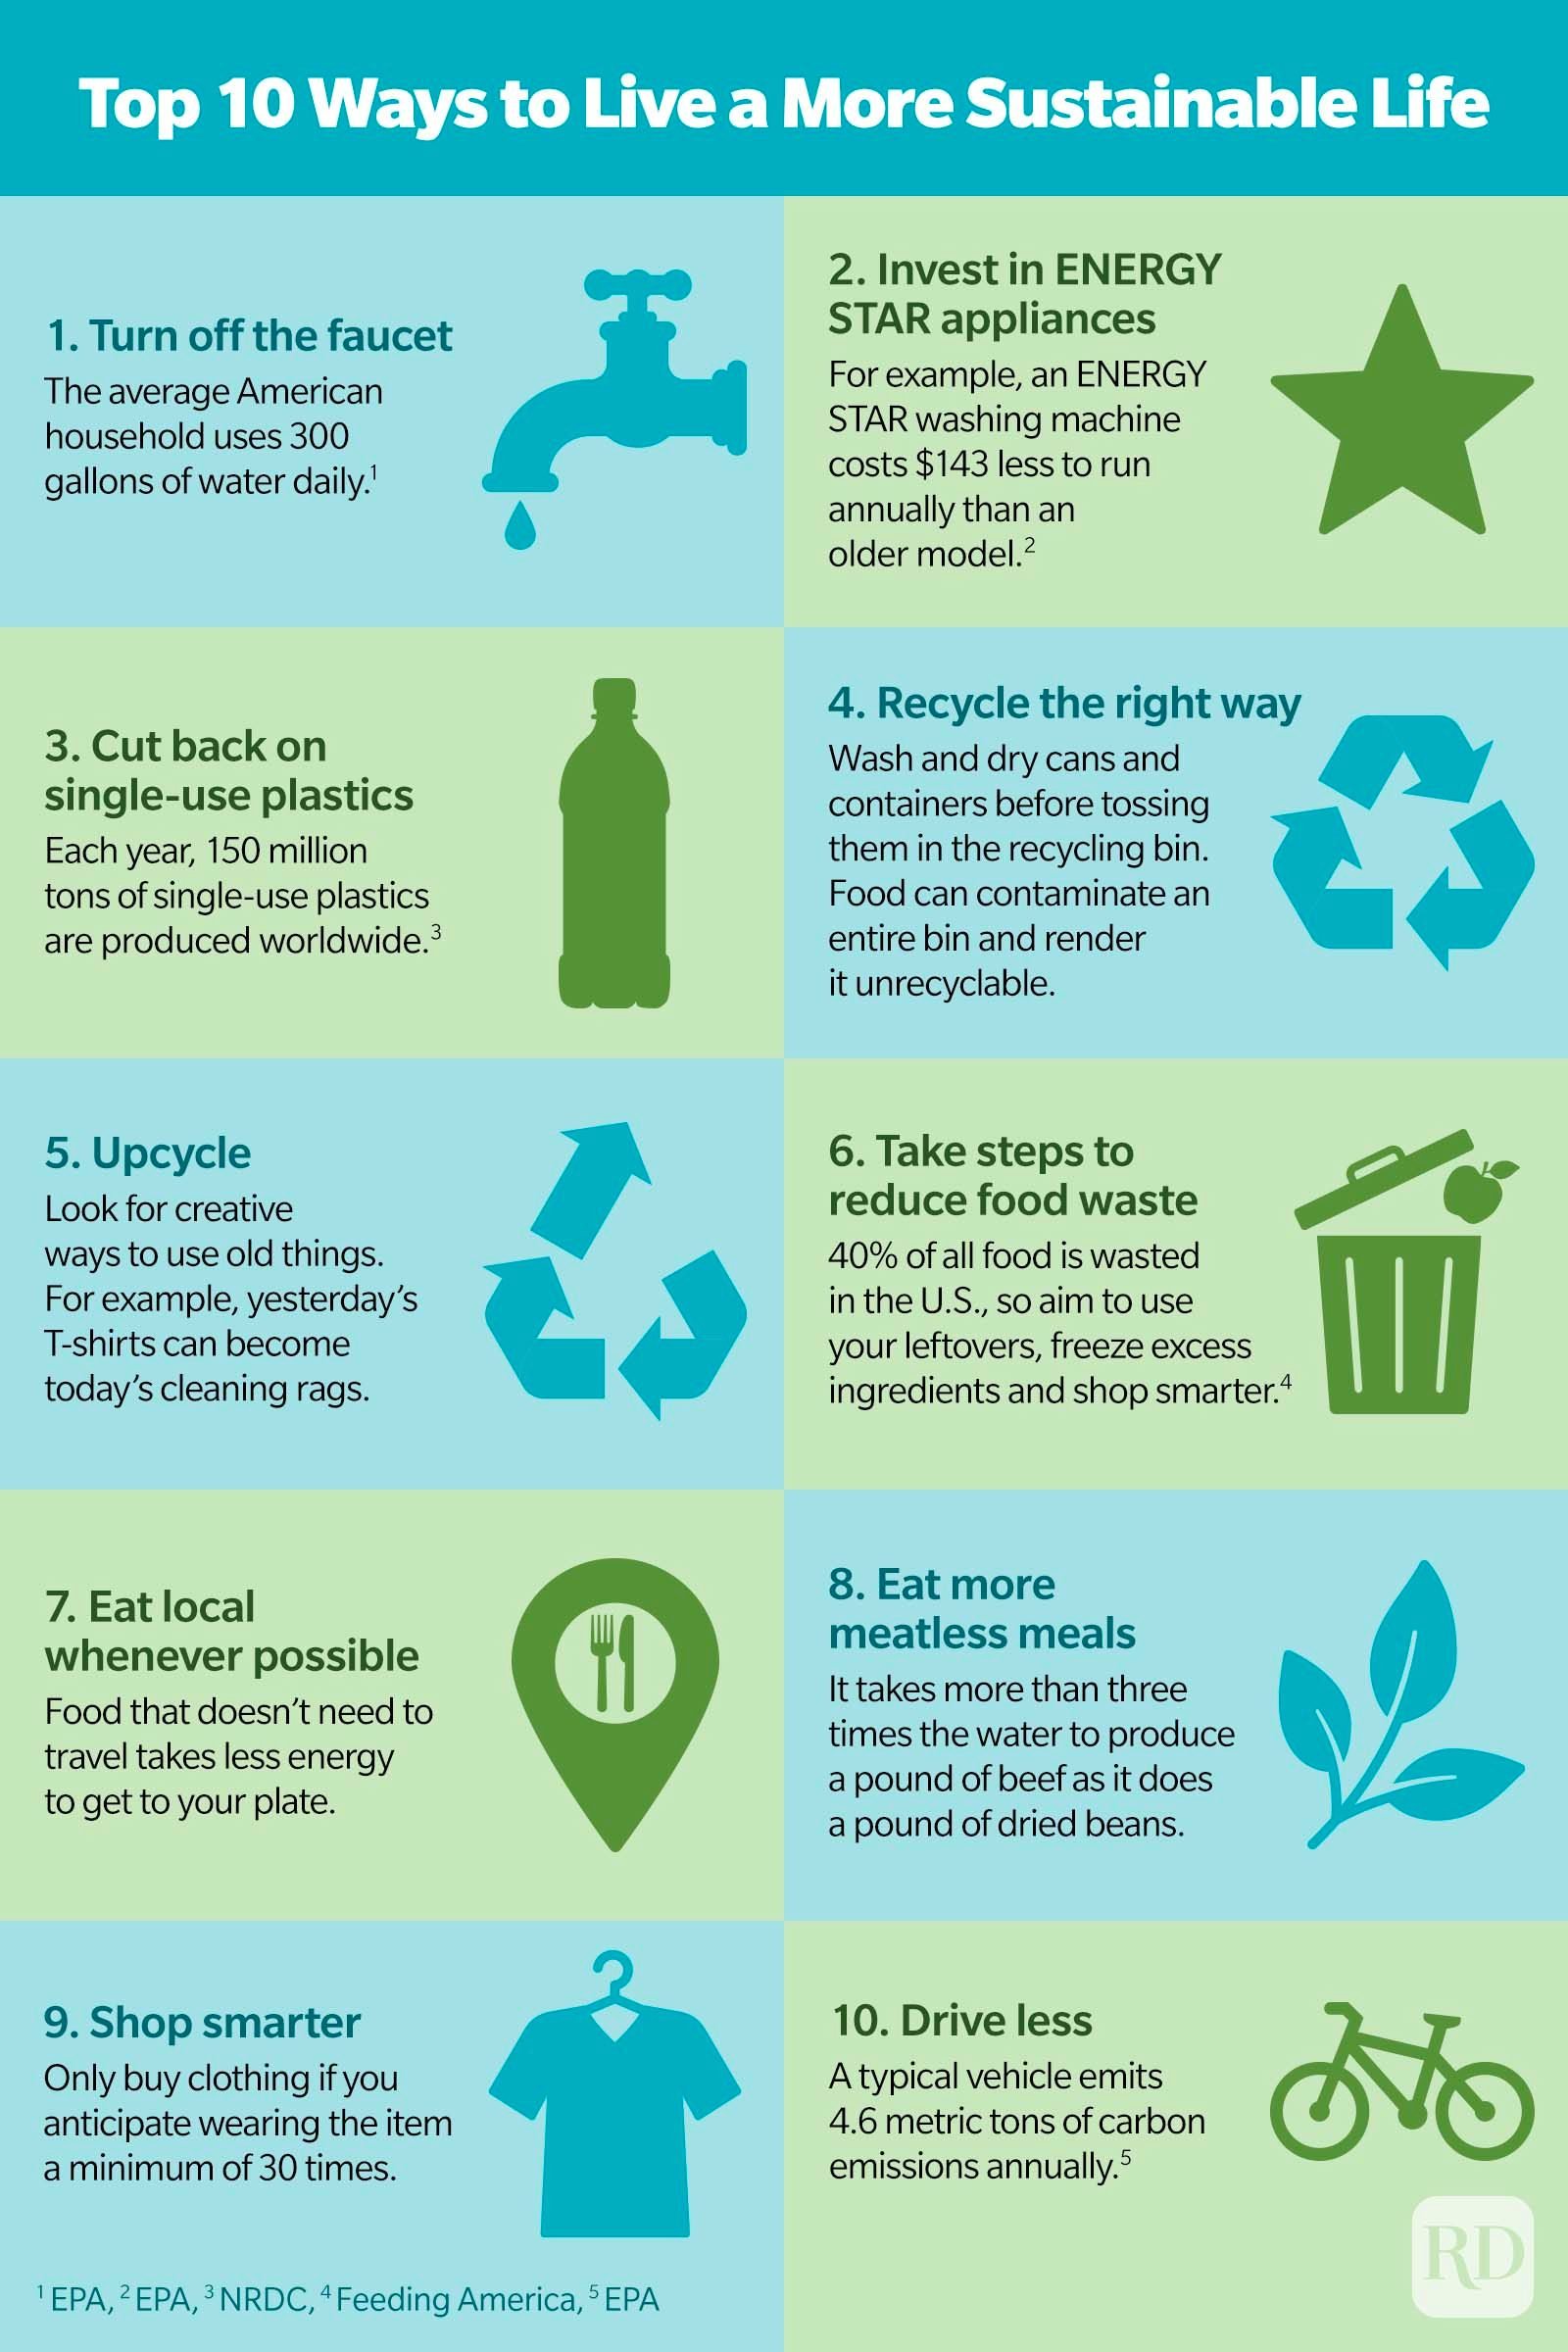 https://www.rd.com/wp-content/uploads/2022/08/Top-10-Ways-to-Live-a-More-Sustainable-Life-Infographic-GettyImages10.jpg